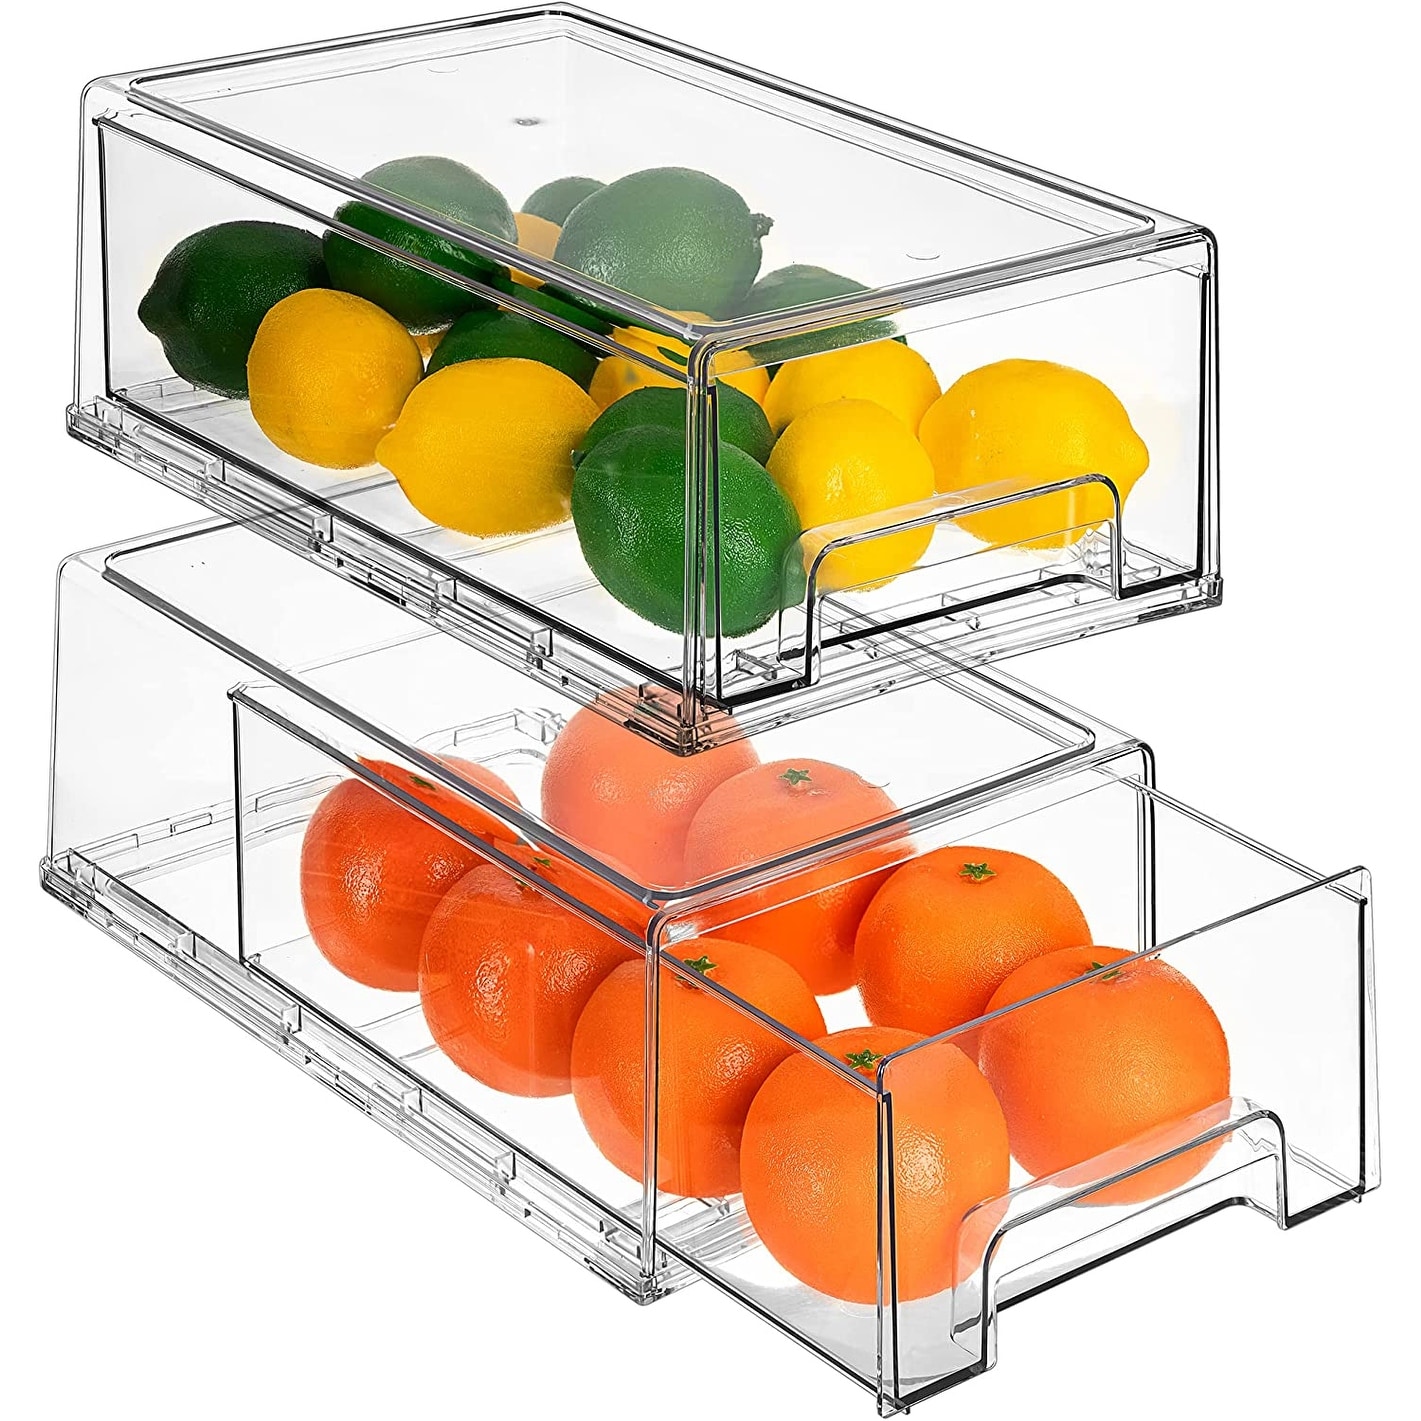 https://ak1.ostkcdn.com/images/products/is/images/direct/72fd70678d28fd04abba5abffffa520bbc5911b8/Sorbus-Fridge-Drawers---Clear-Stackable-Pull-Out-Refrigerator-Organizer-Bins-2-Pack%2C-Medium.jpg